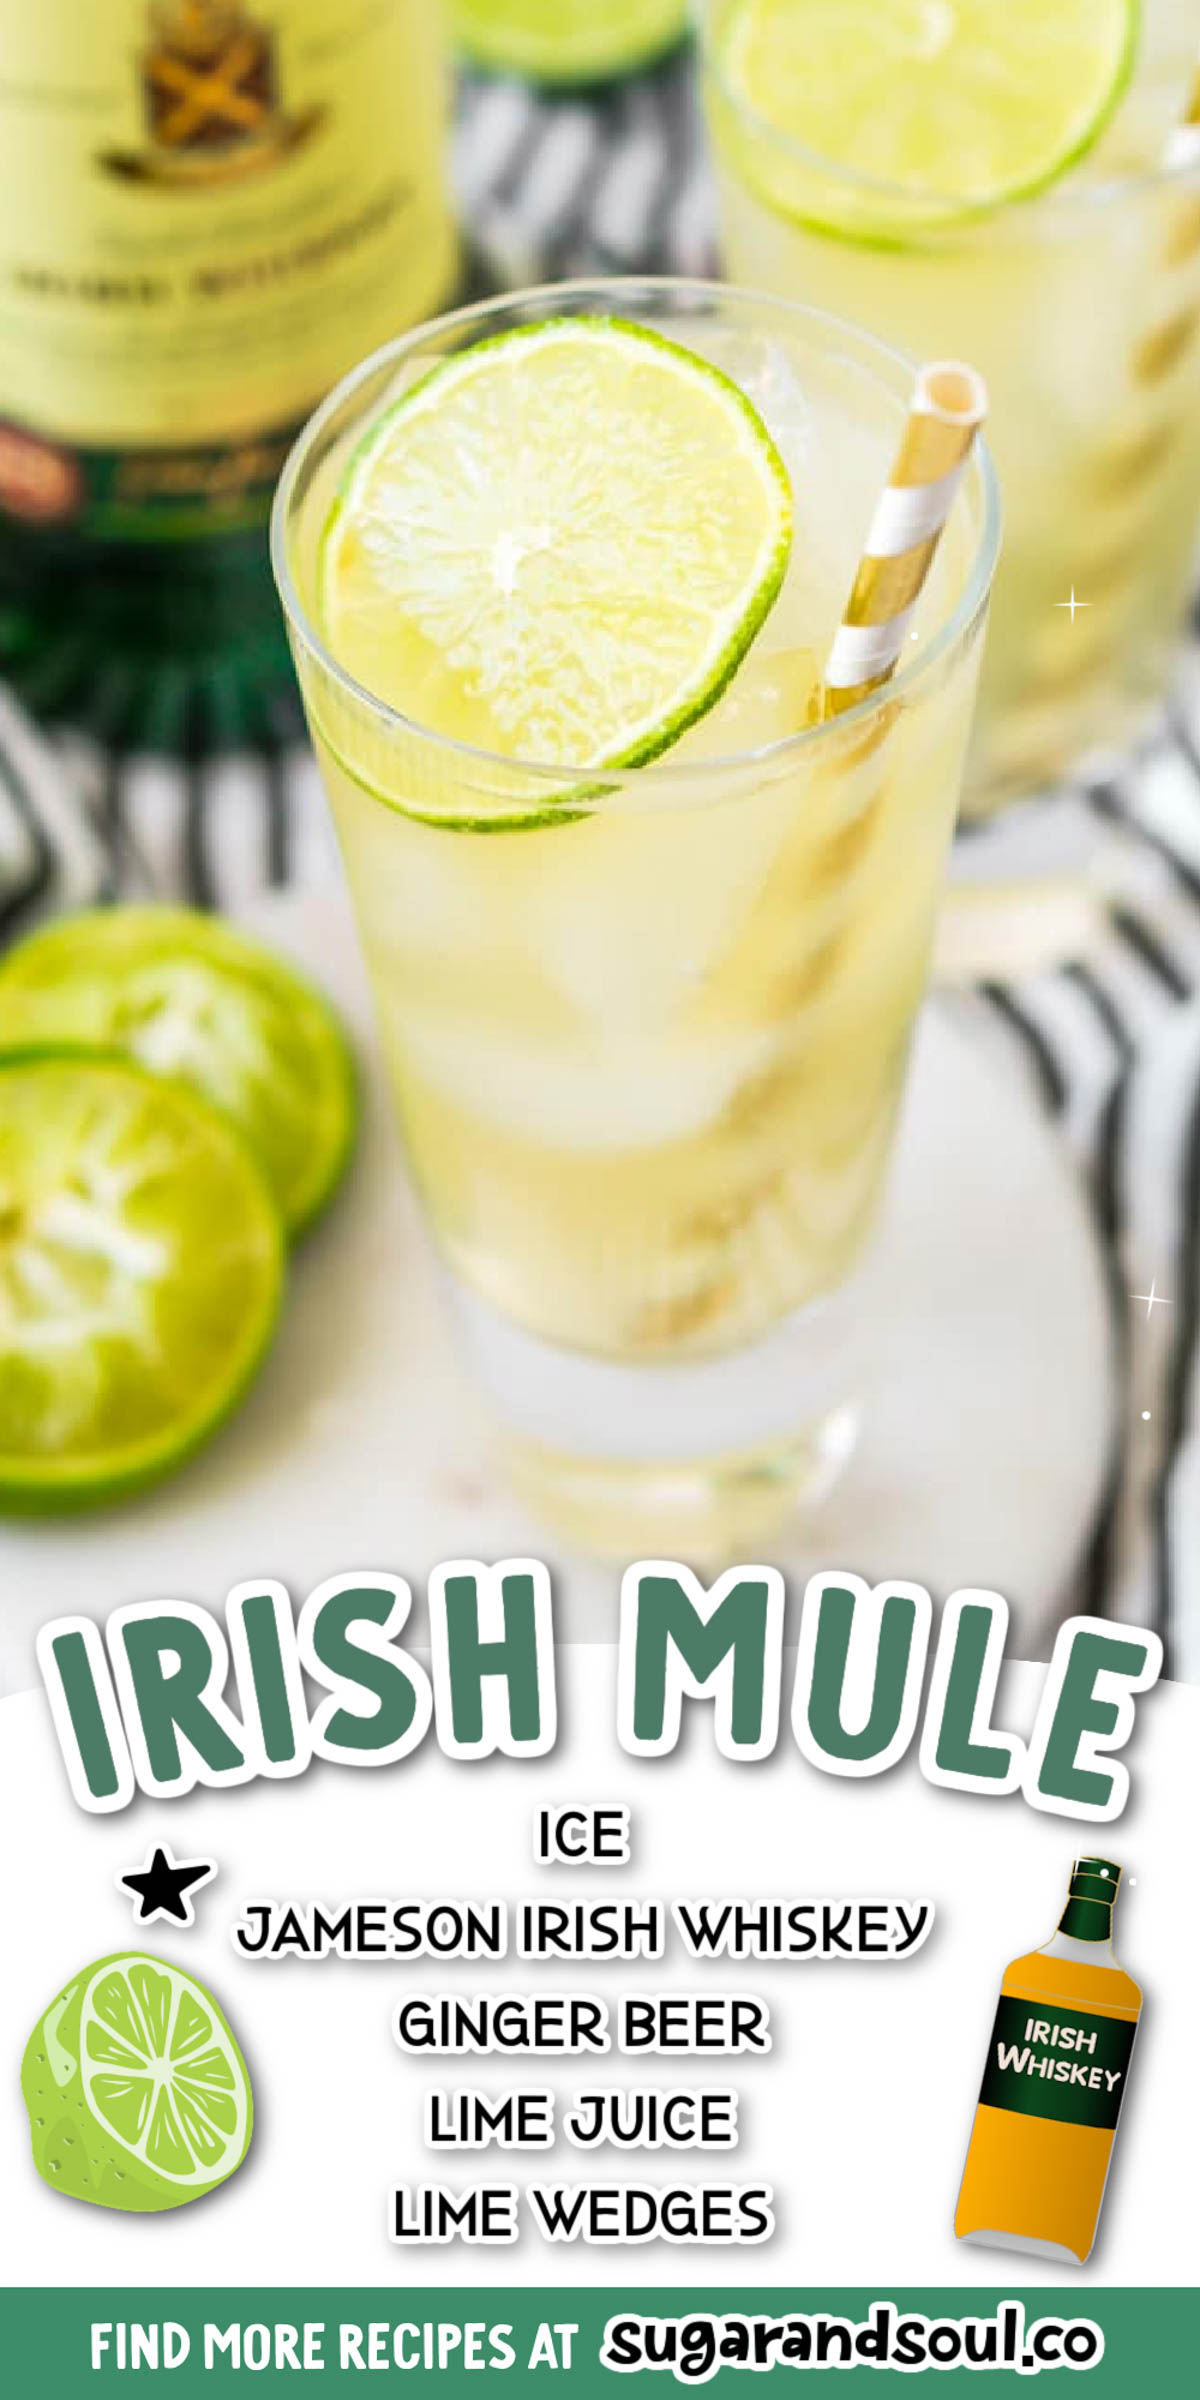 This Irish Mule Cocktail is a bright mix of smooth Irish whiskey, zesty ginger beer, and tart fresh squeezed lime juice and it's sure to make you want to dance this St. Patrick's Day! via @sugarandsoulco